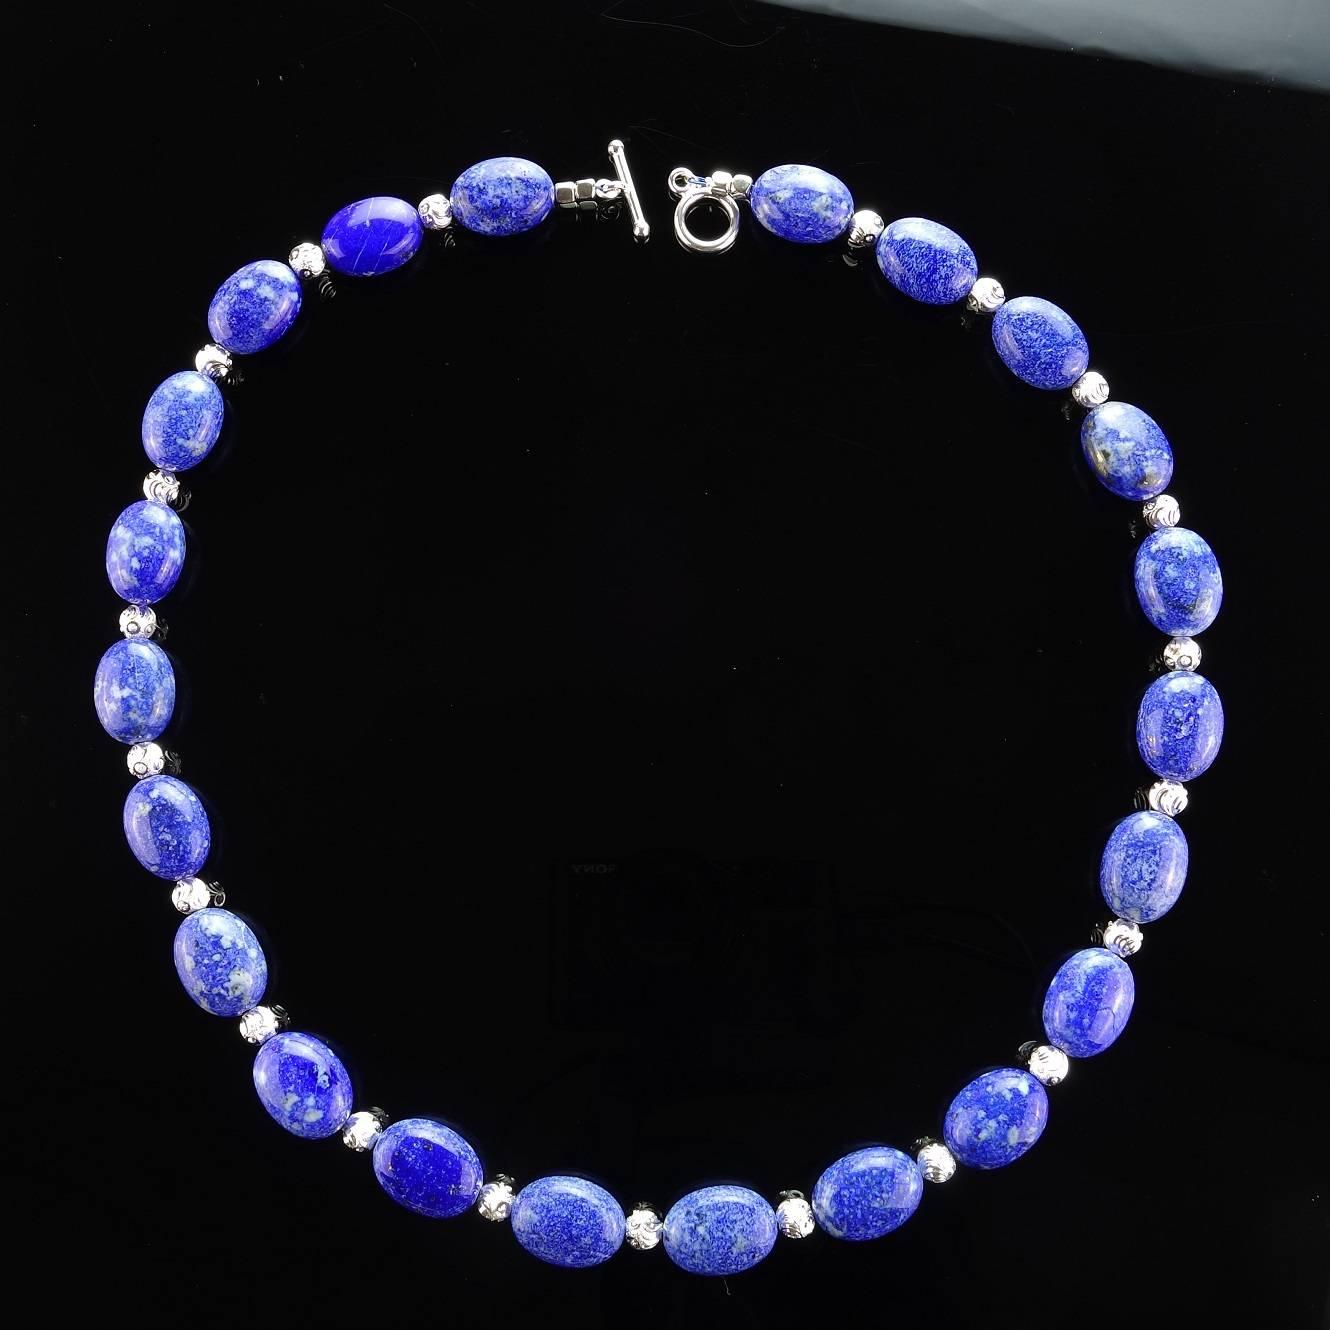 Medium Blue Puffy Lapis Lazuli, 18x13mm, nuggets with engraved silver tone accents, 5mm, and a Sterling Silver toggle clasp necklace.  This delightful necklace is such a lovely shade of blue and the size and shape of the nuggets make it very